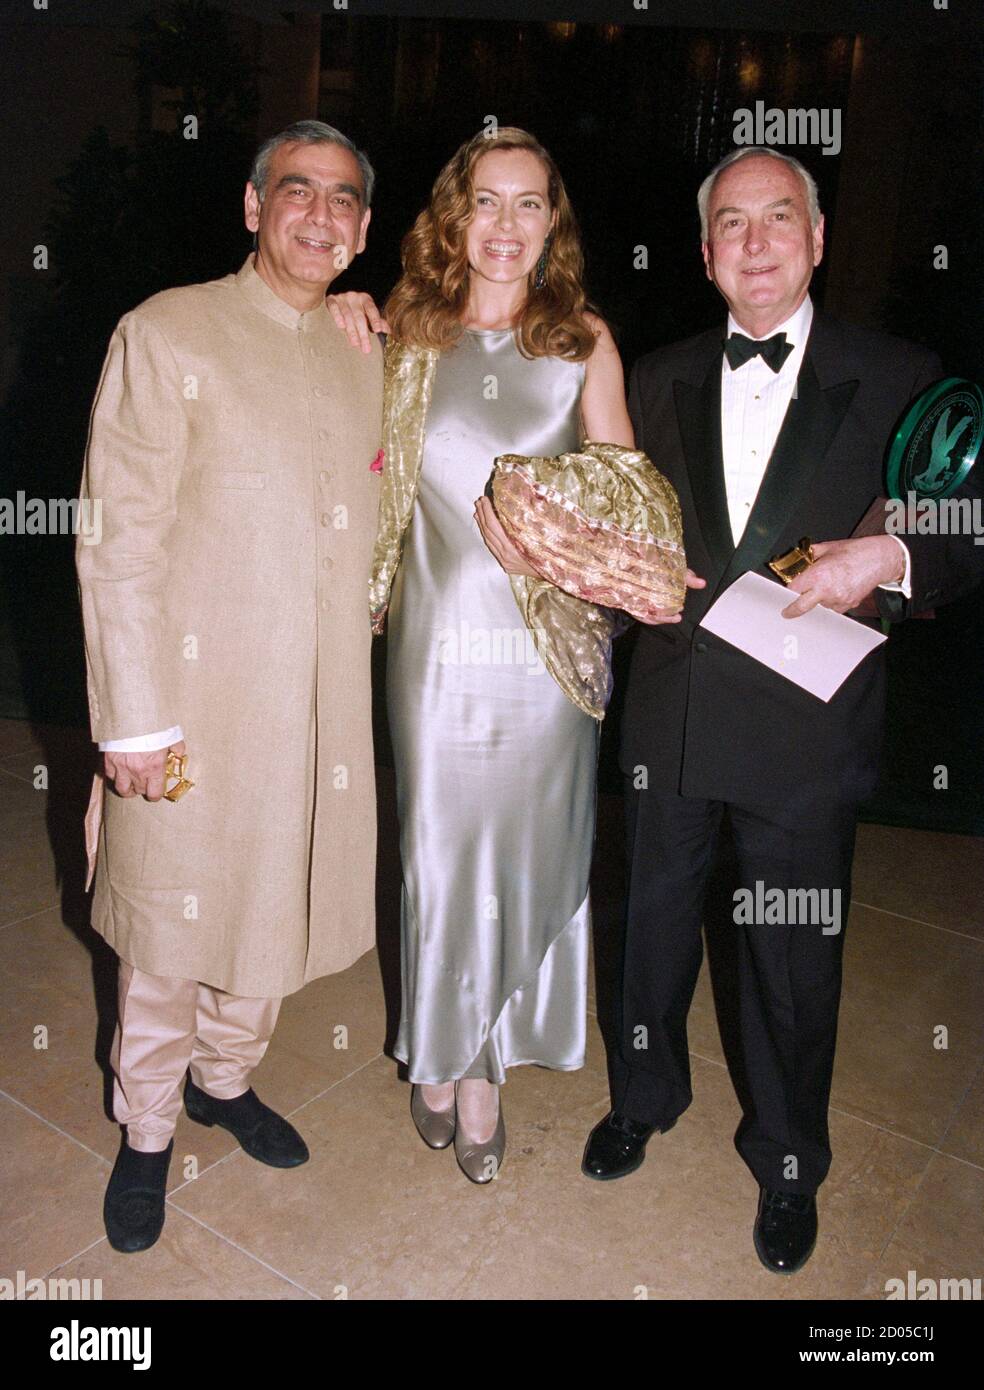 ARCHIVE: LOS ANGELES, CA. March 11, 1995: Actress Greta Scacchi with James Ivory & Ismail Merchant at the 1995 Directors Guild of America Awards in Beverly Hills. File photo © Paul Smith/Featureflash Stock Photo